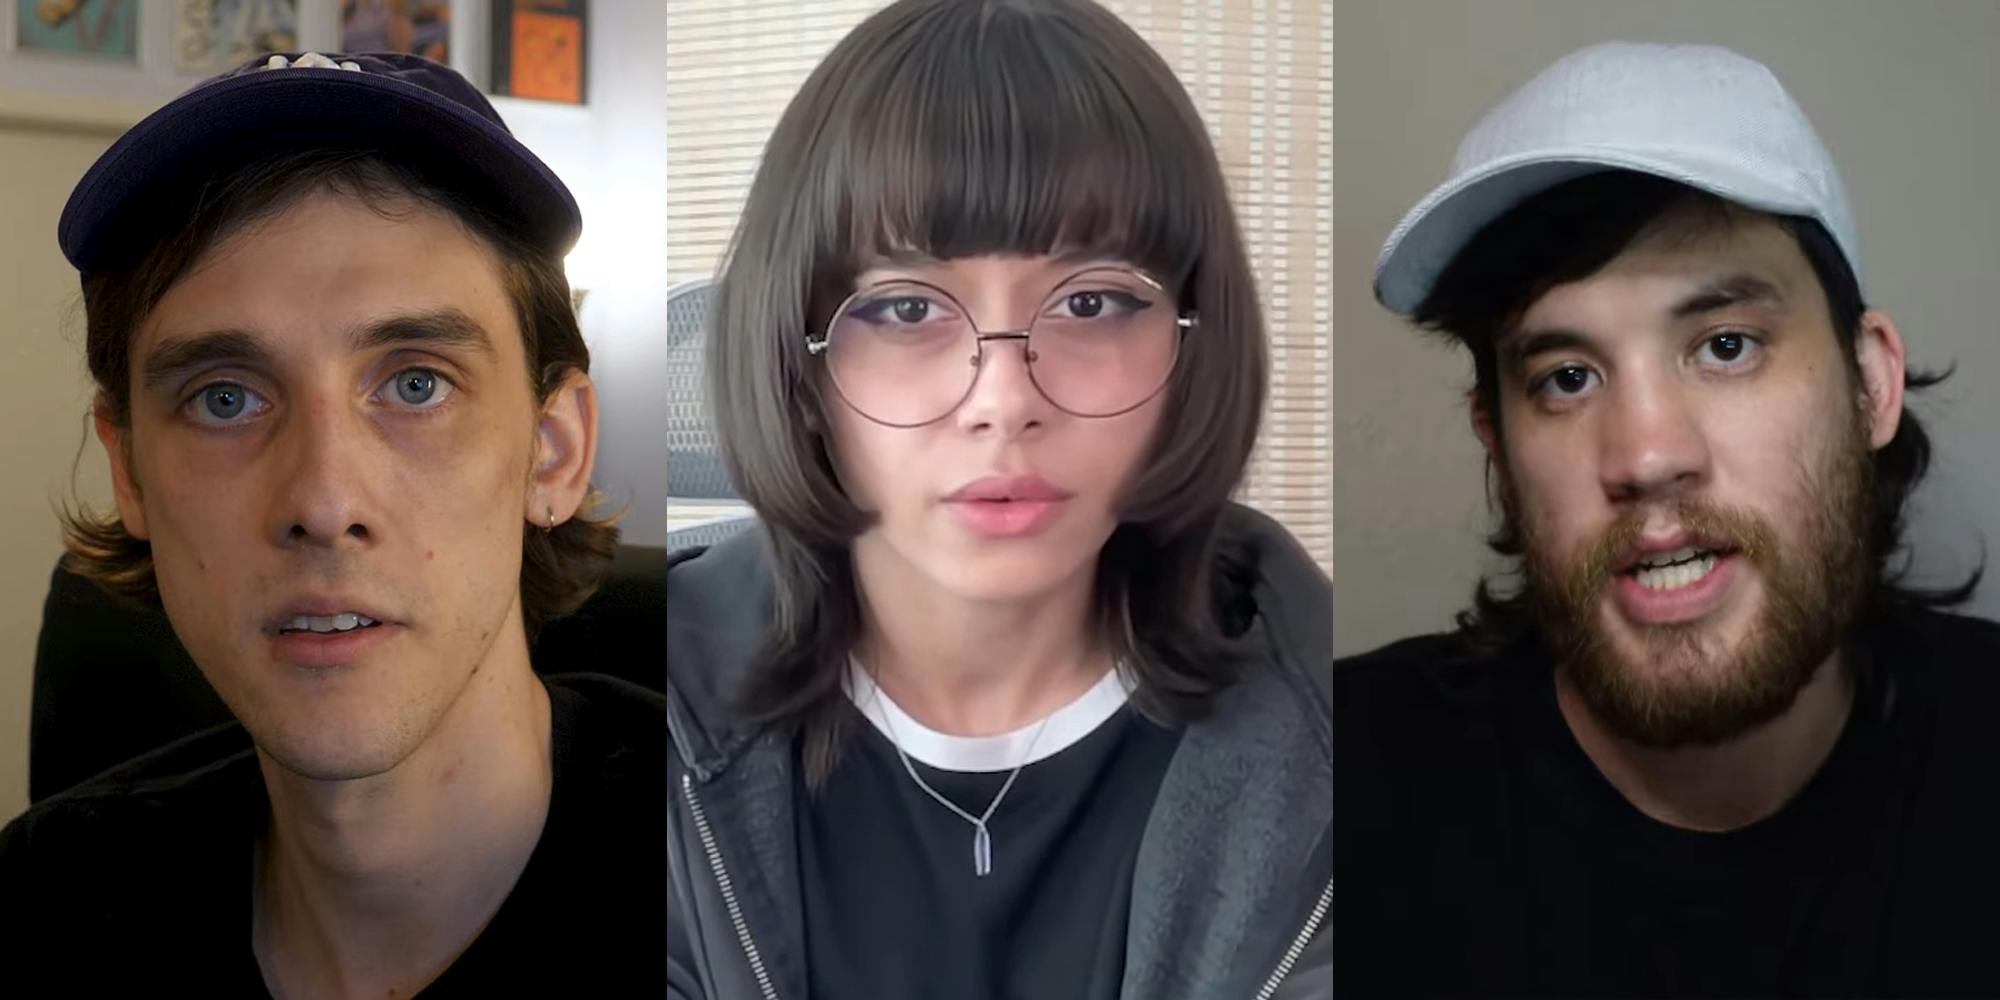 YouTubers Behind SuperMega Channel Apologize After Being Accused of ‘Covering Up’ a Sexual Assault by One of Their Employees